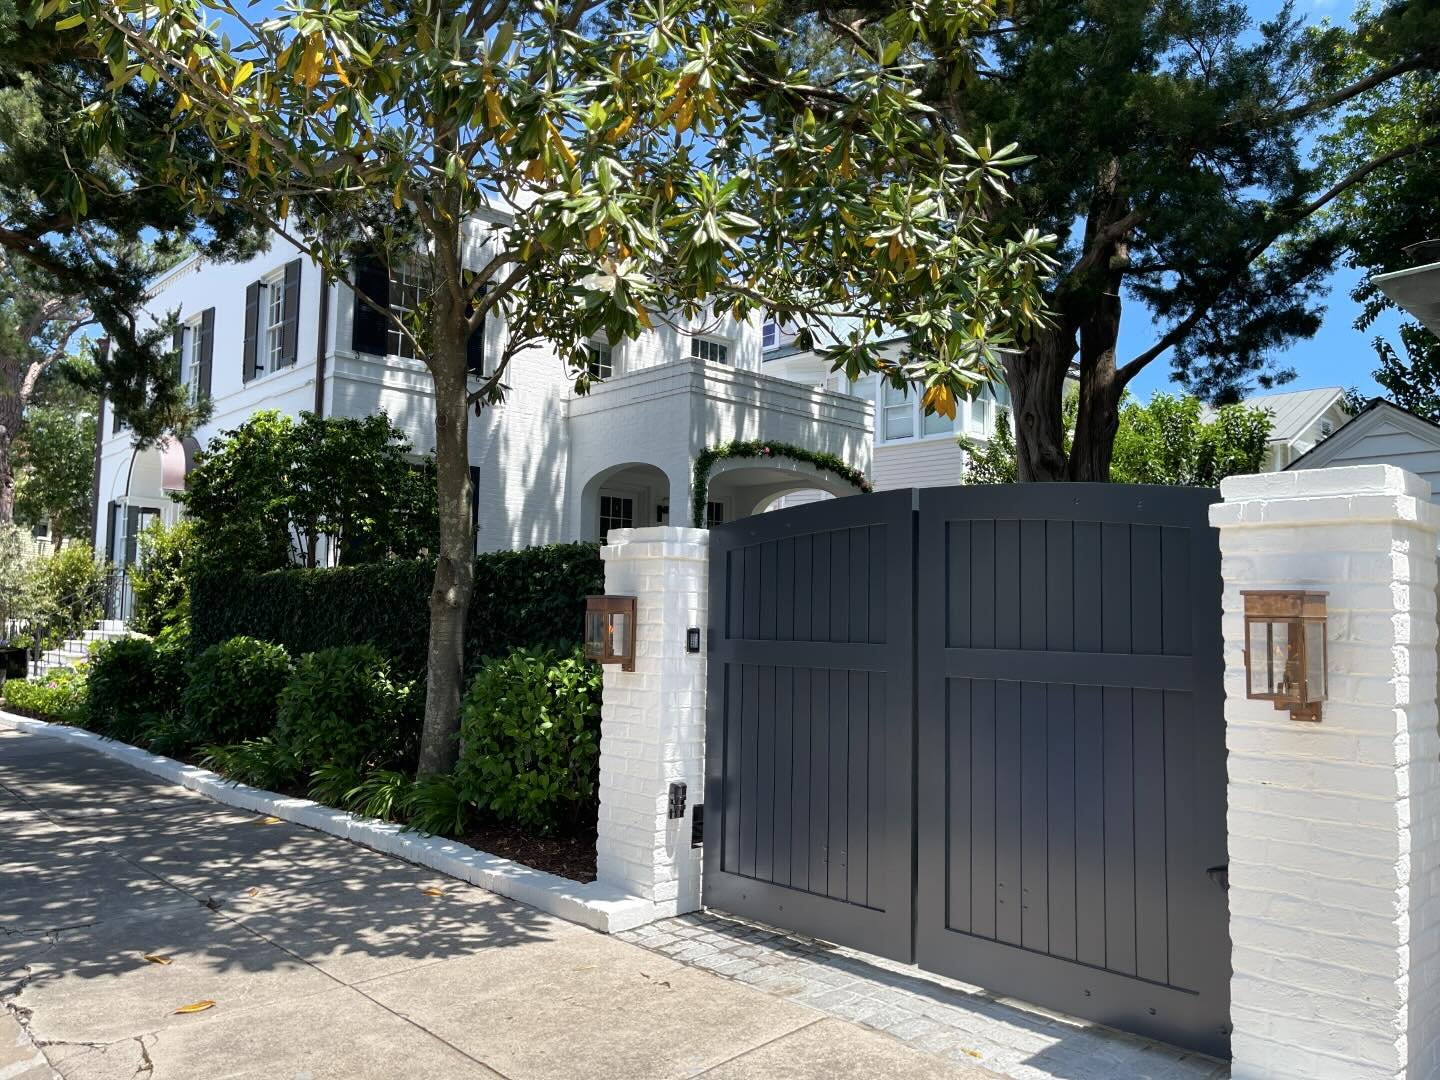 Project complete! Matching house and smaller scale gate gas lanterns for this recent renovation with @beccajonesinteriors . 

#charlestonpeninsula #historicrenovation #historiccharleston #charlestonsc #handcrafted #coppersmith #gaslanterns #madeincha